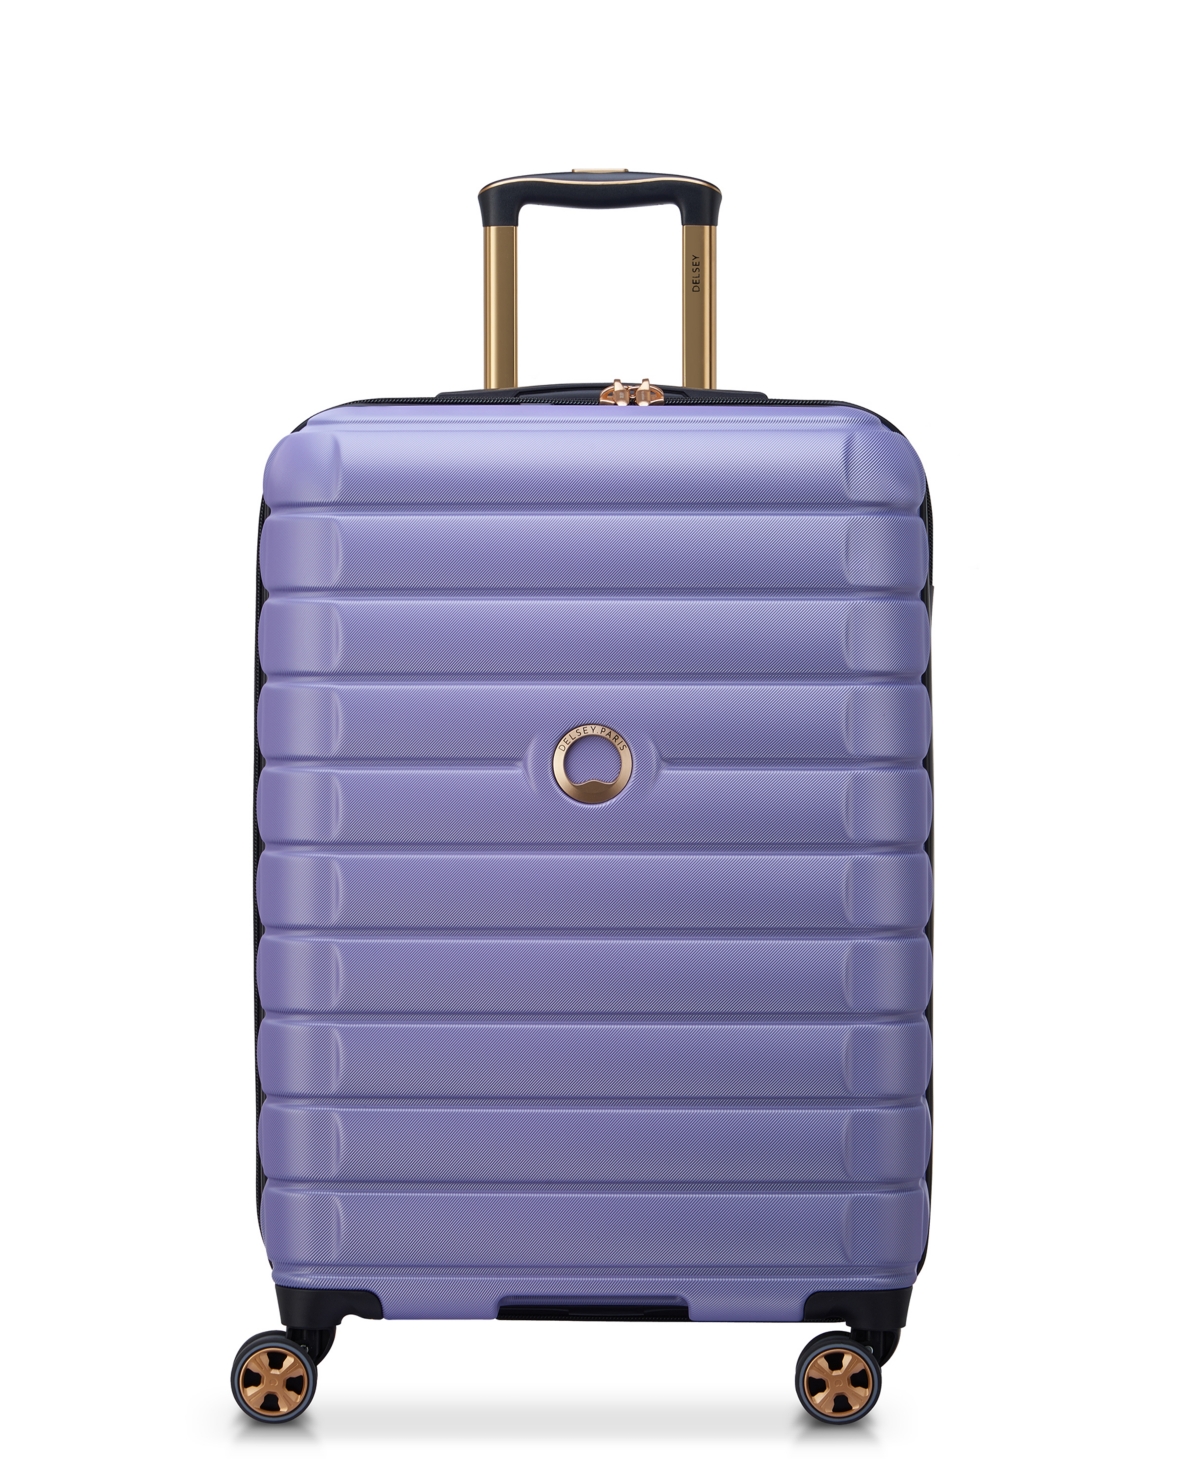 Delsey Shadow 5.0 Expandable 24" Check-in Spinner Luggage In Lilac